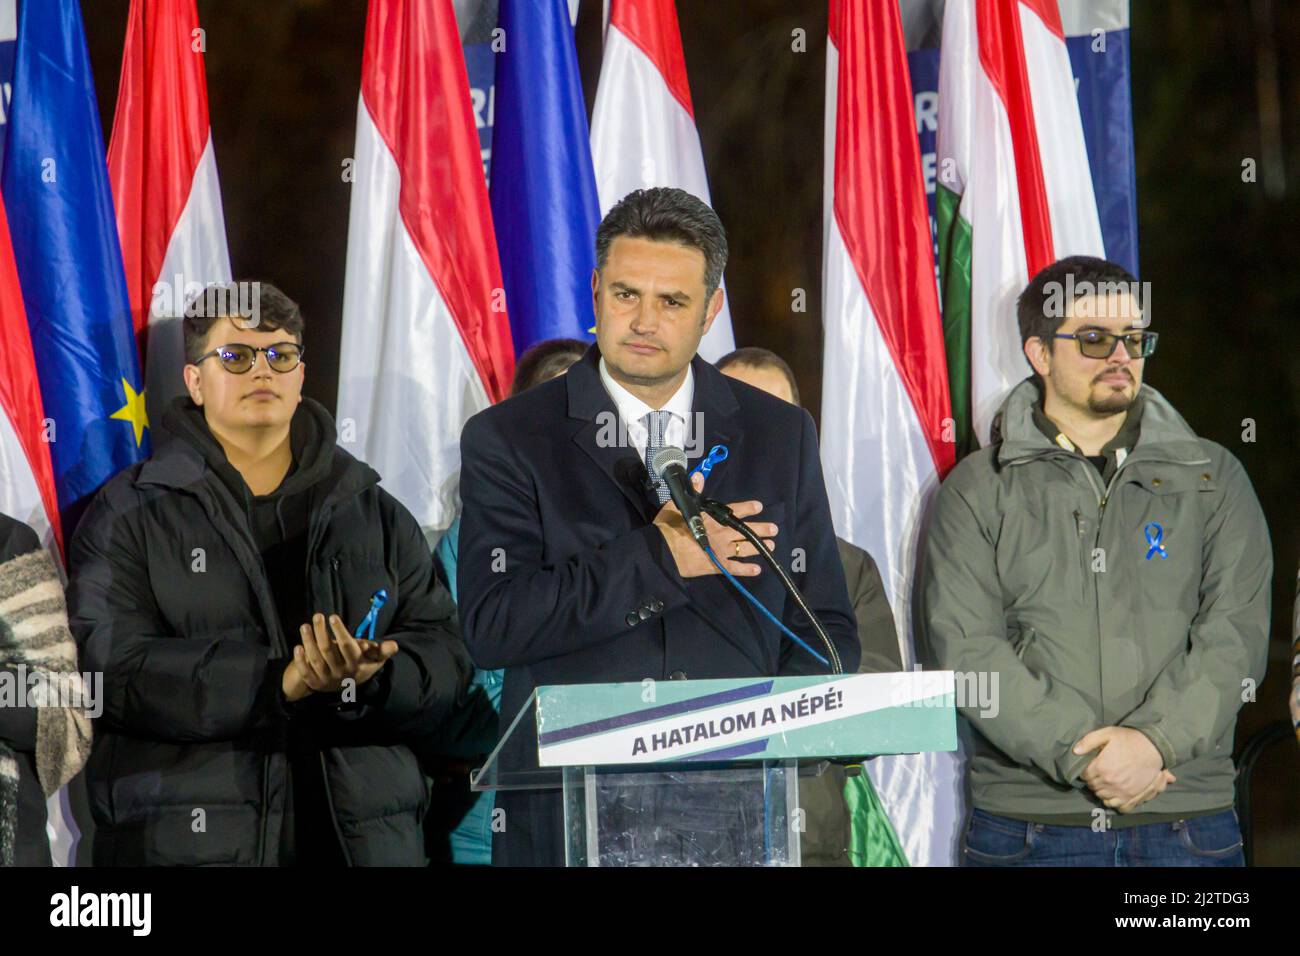 Budapest, Budapest. 3rd Apr, 2022. Peter Marki-Zay (C), leader of the  opposition alliance, delivers his speech at a rally in Budapest, Hungary on  April 3, 2022. Hungarian Prime Minister Viktor Orban's ruling